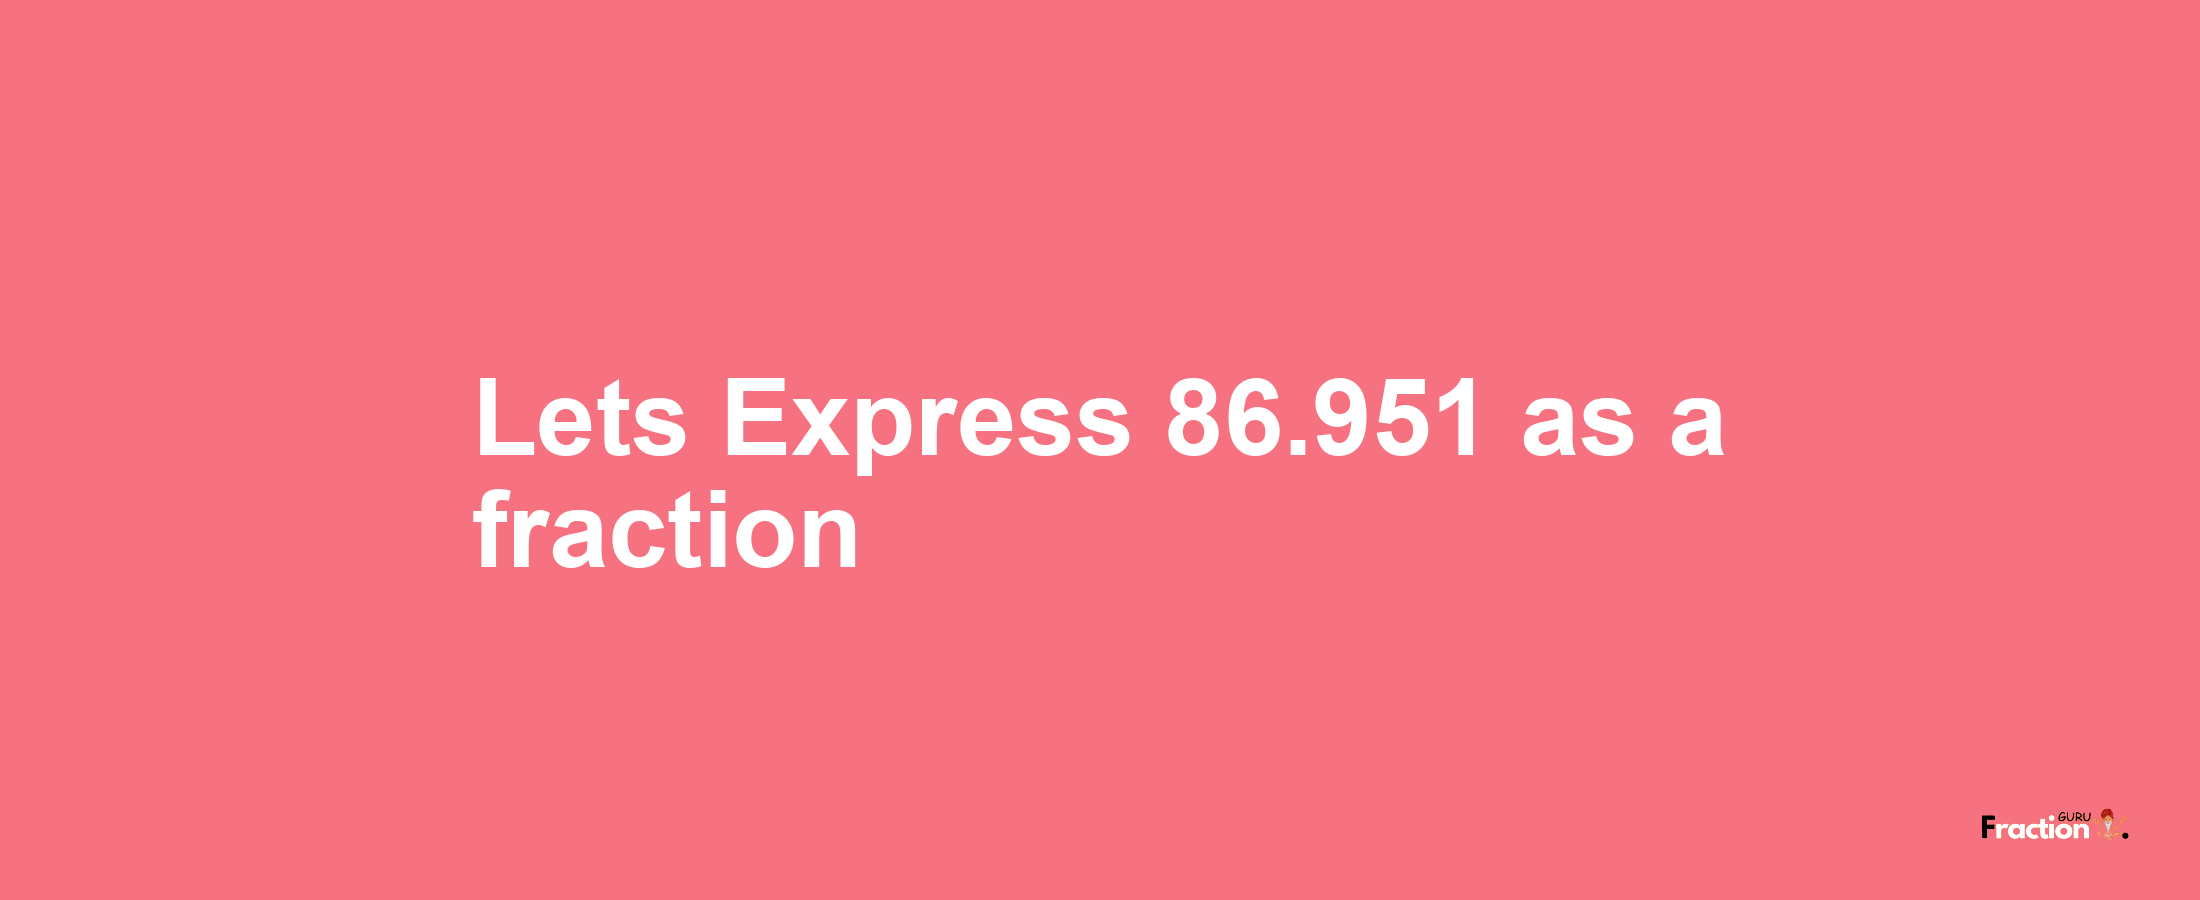 Lets Express 86.951 as afraction